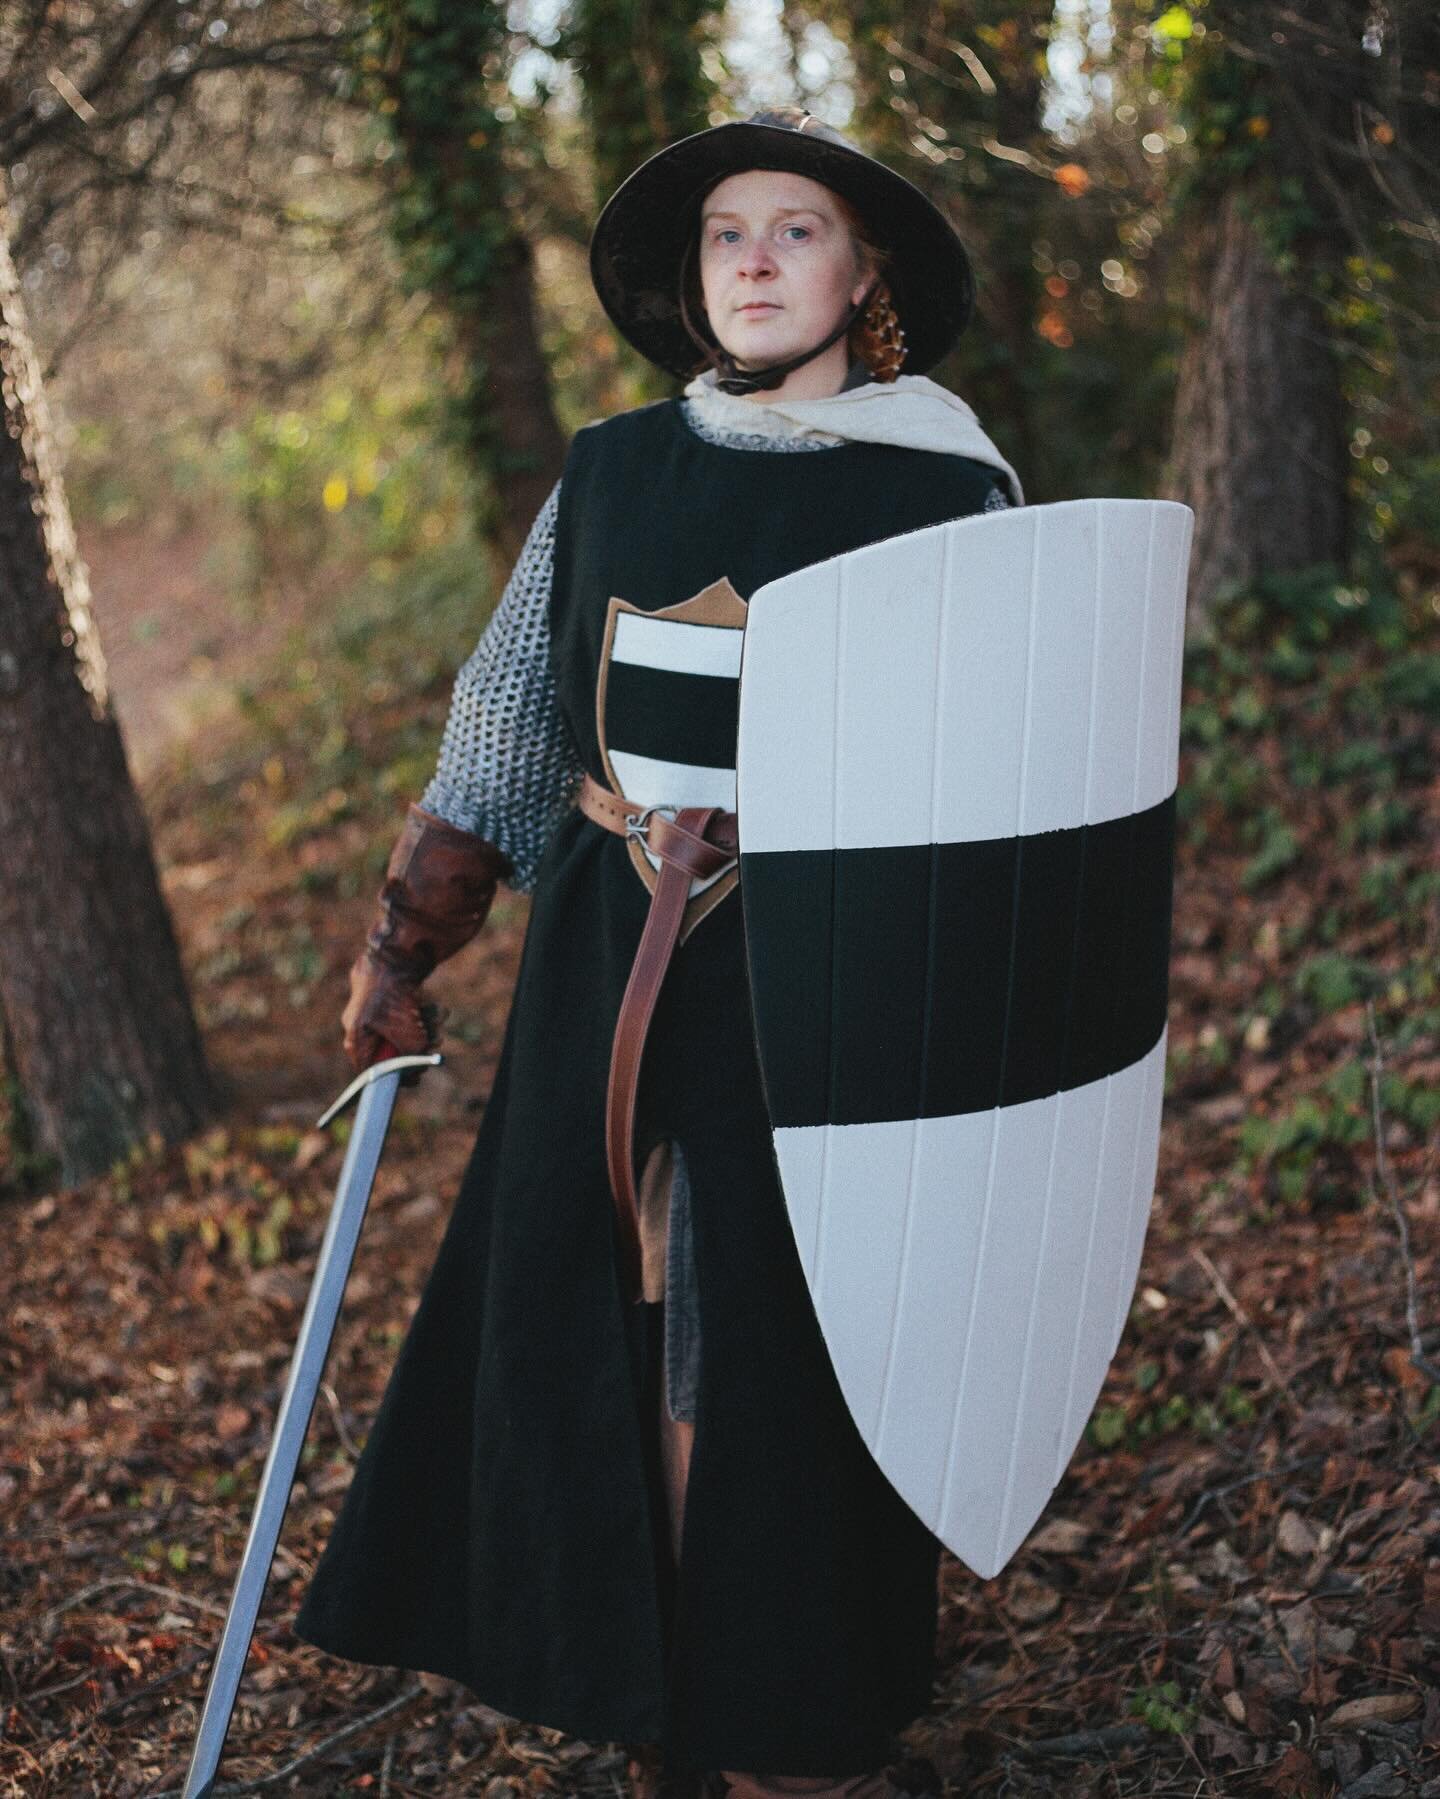 BARONY FEATURE: Isolde of Winchester, Baroness of Winchester
Played by: Kristen Wiggins @tolkienerd 
&mdash;
Coat of arms: Argent, a fess sable
Surcoat Color: Black
&mdash;
The warriors of Winchester march into battle bearing the black band on their 